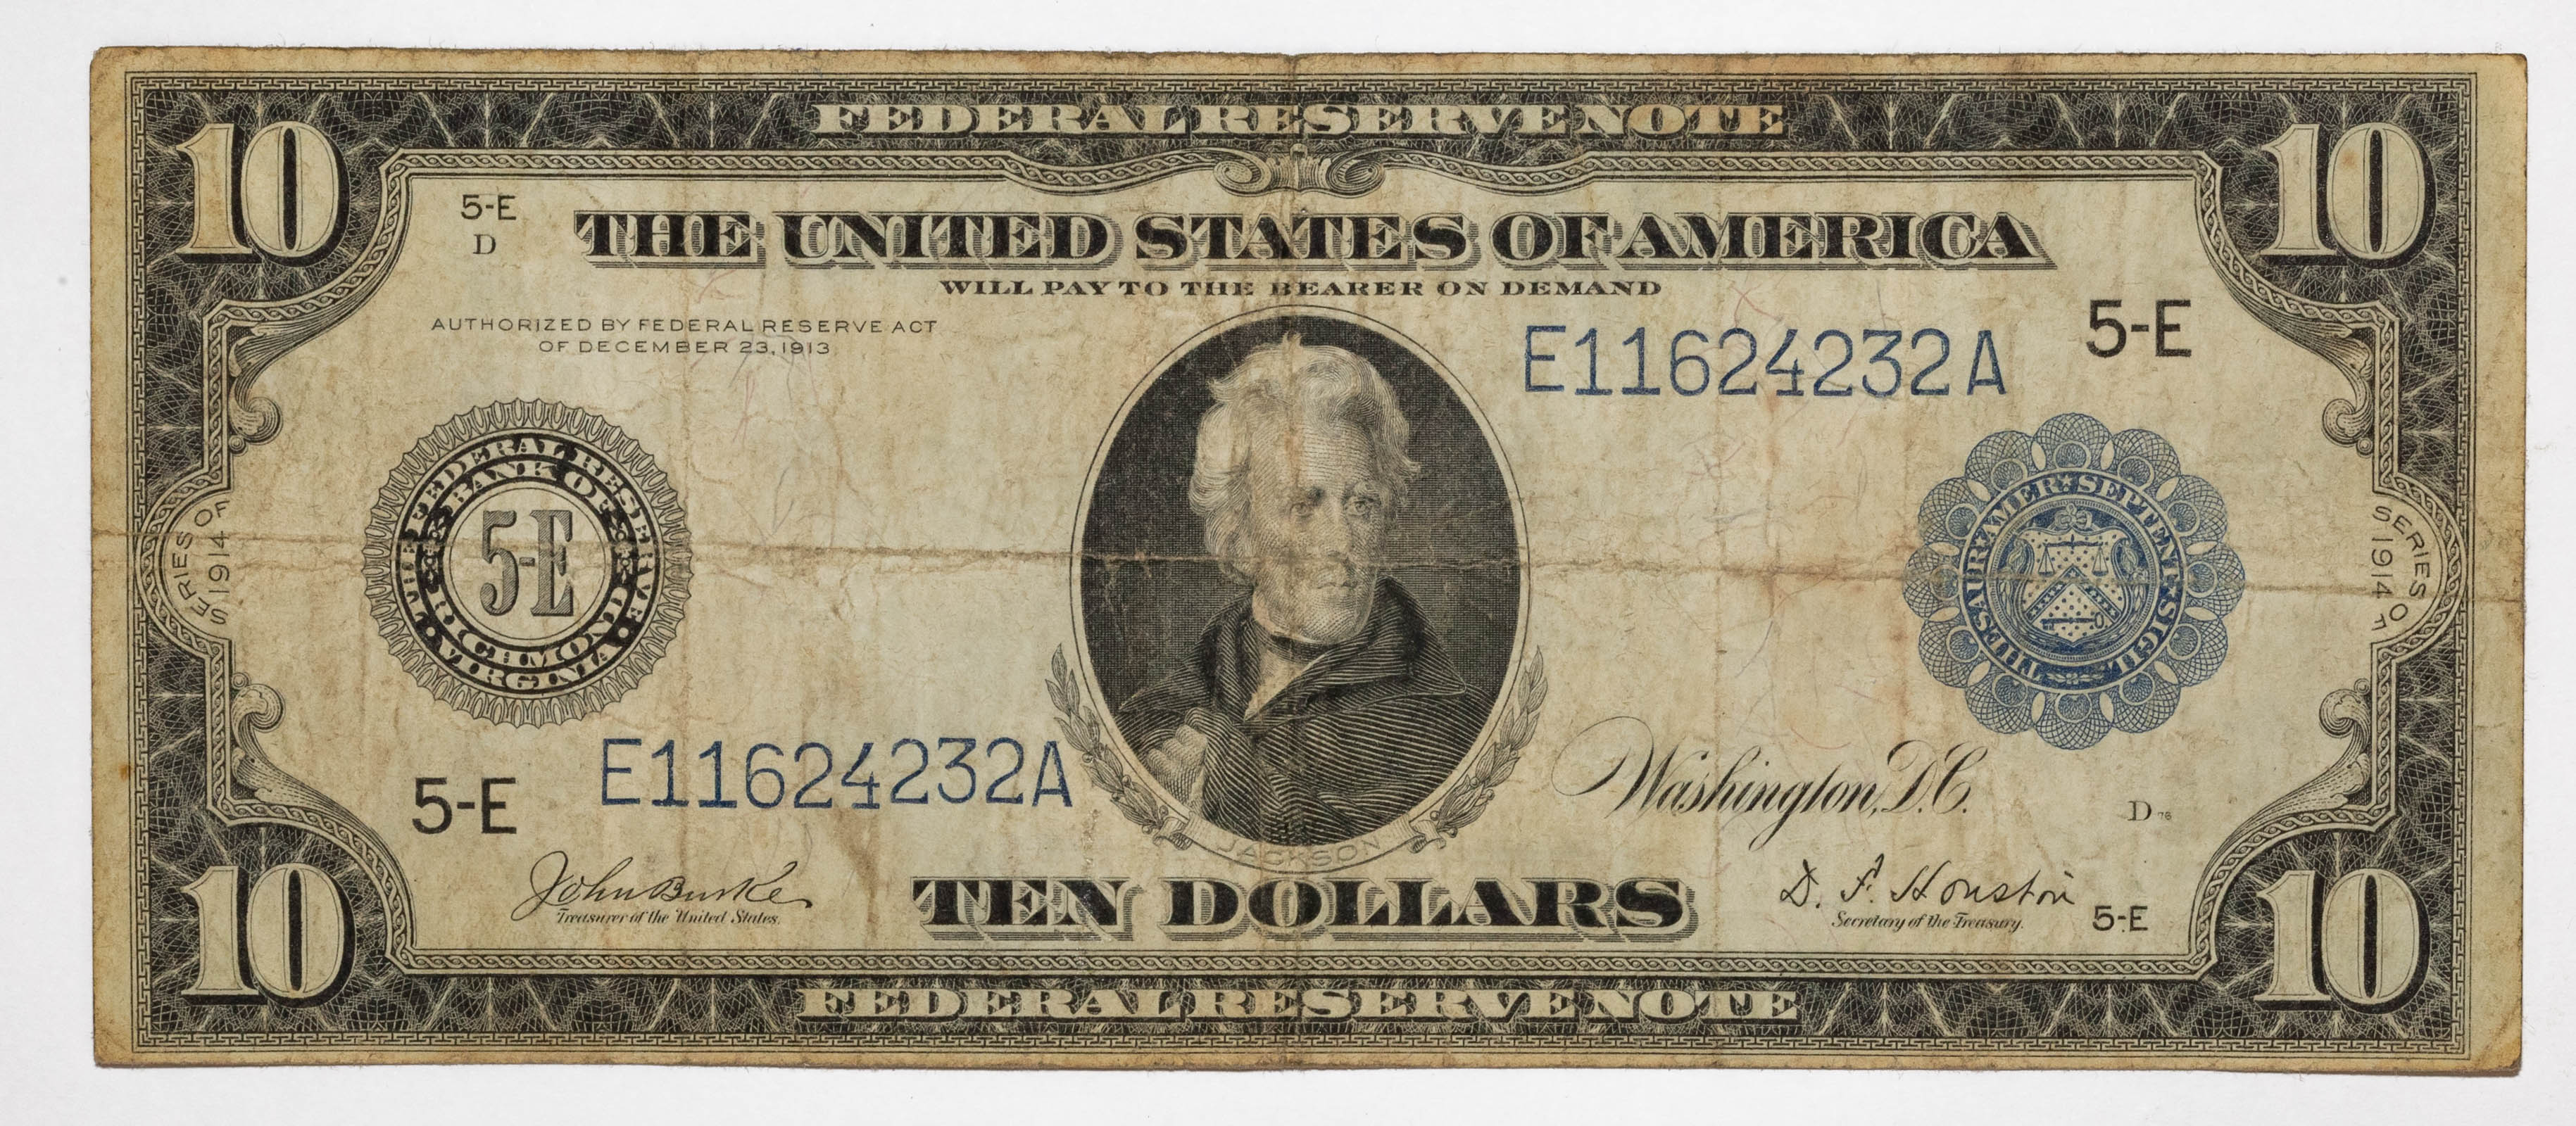  10 FEDERAL RESERVE NOTE 1914 FR 922 338316